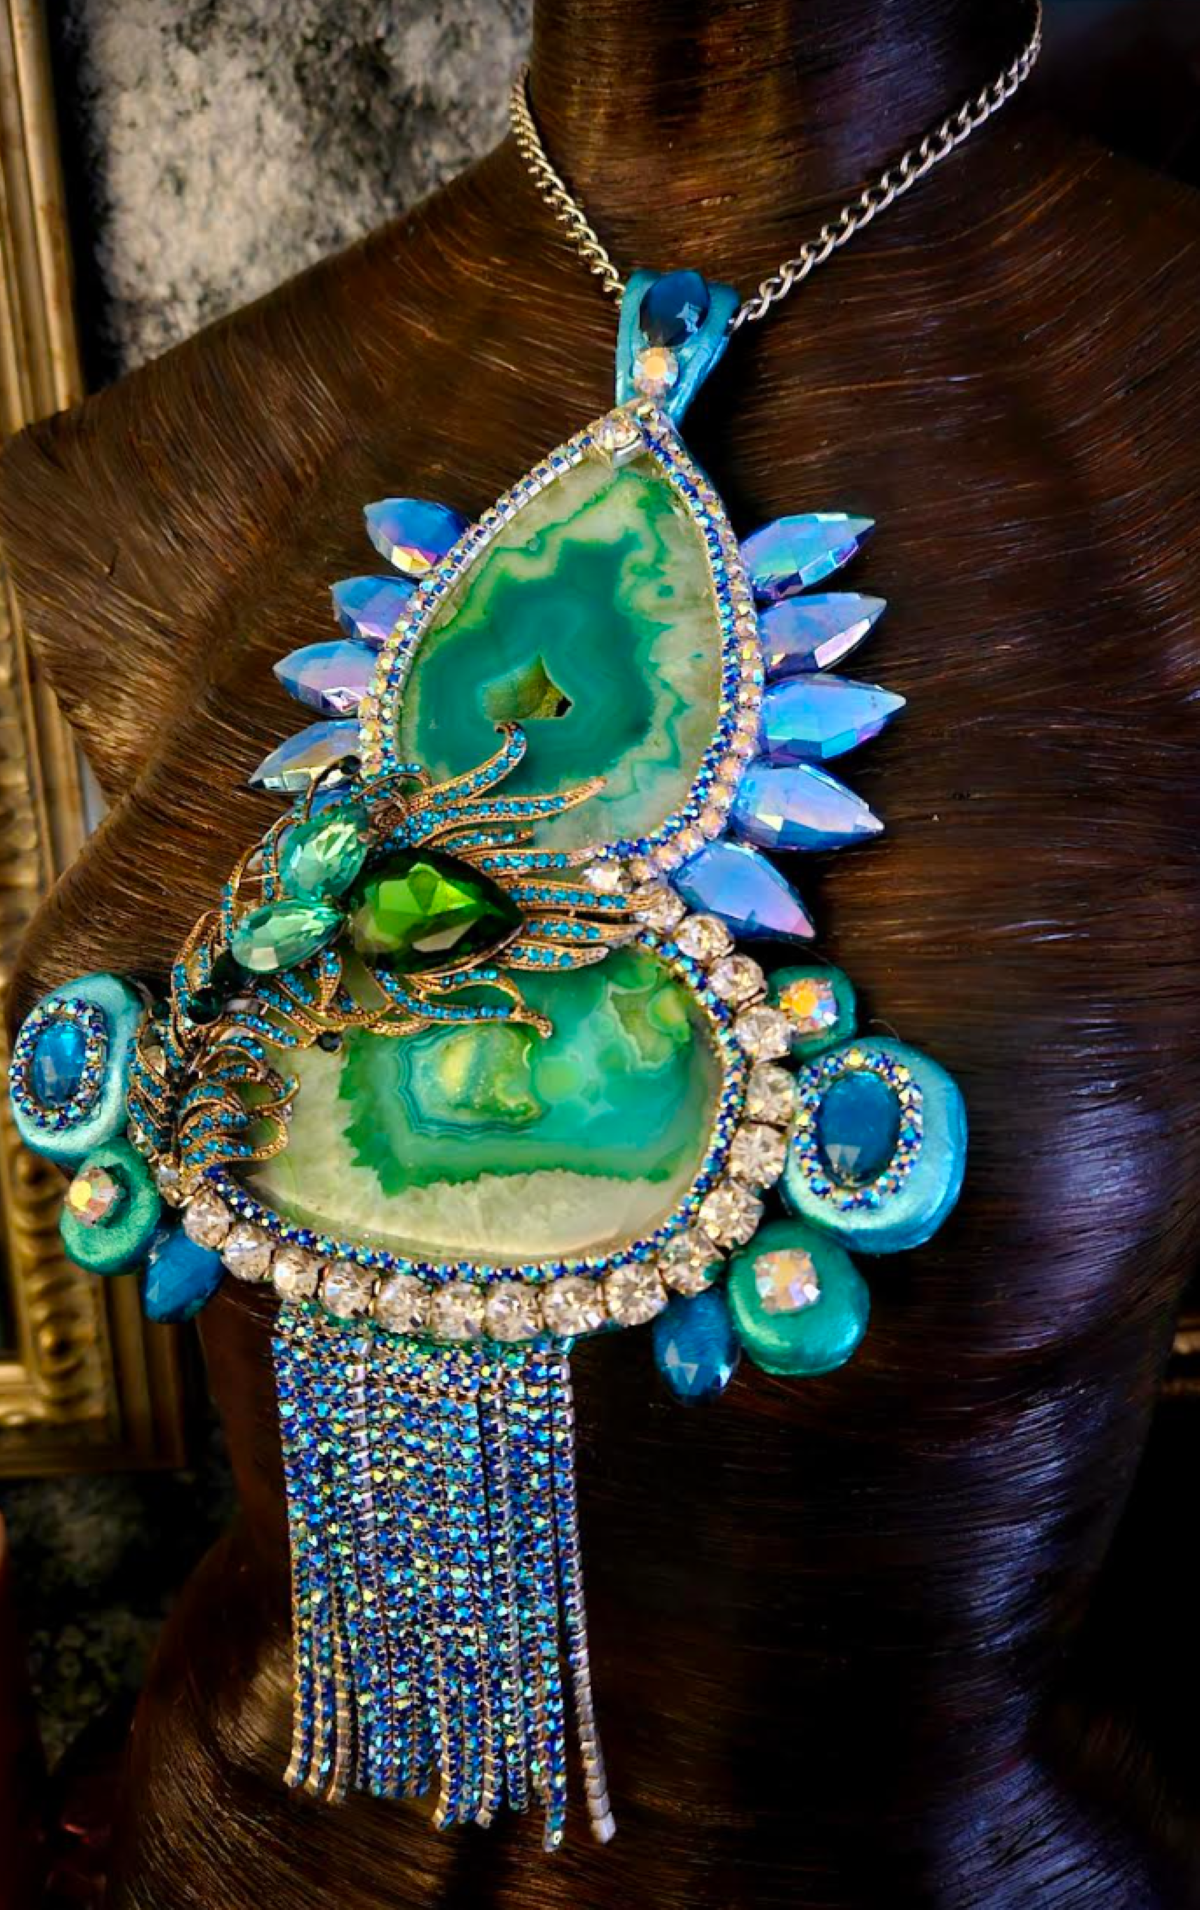 Art Deco Sculpted Crystal & Rhinestone Statement Pendant - Stunning Blue Green Bling Bling Chest Piece -  Flapper Jewelry from Kat Kouture Designs